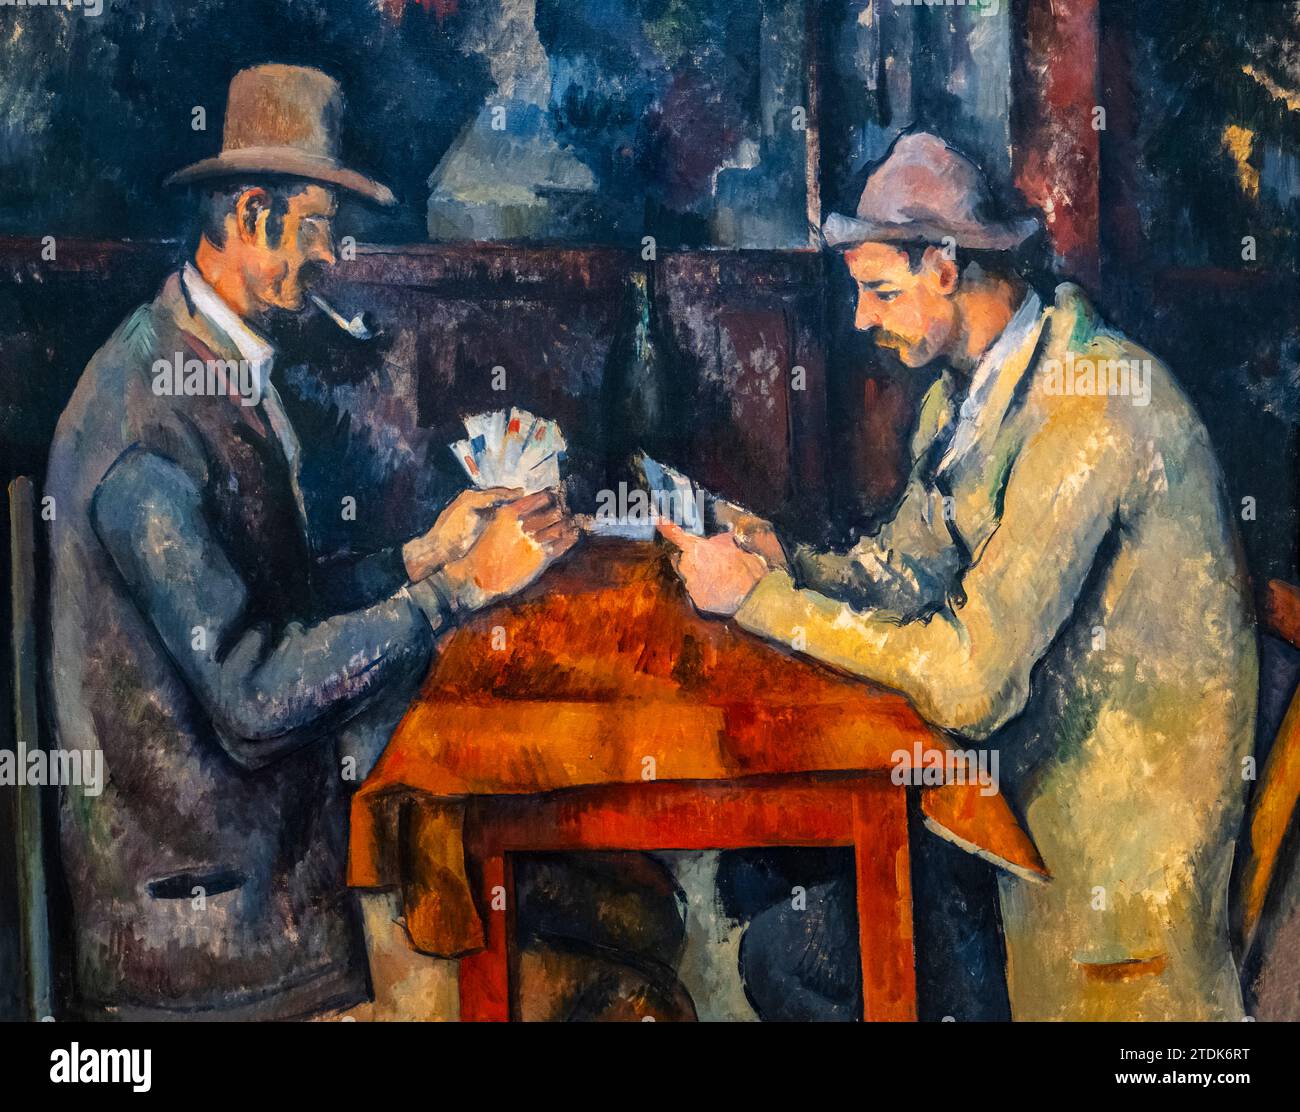 PAUL CEZANNE (1839-1906) THE CARD PLAYERS (1892-1896) THE COURTAULD GALLERY (1932) SOMERSET HOUSE (1776) LONDON UNITED KINGDOM Stock Photo